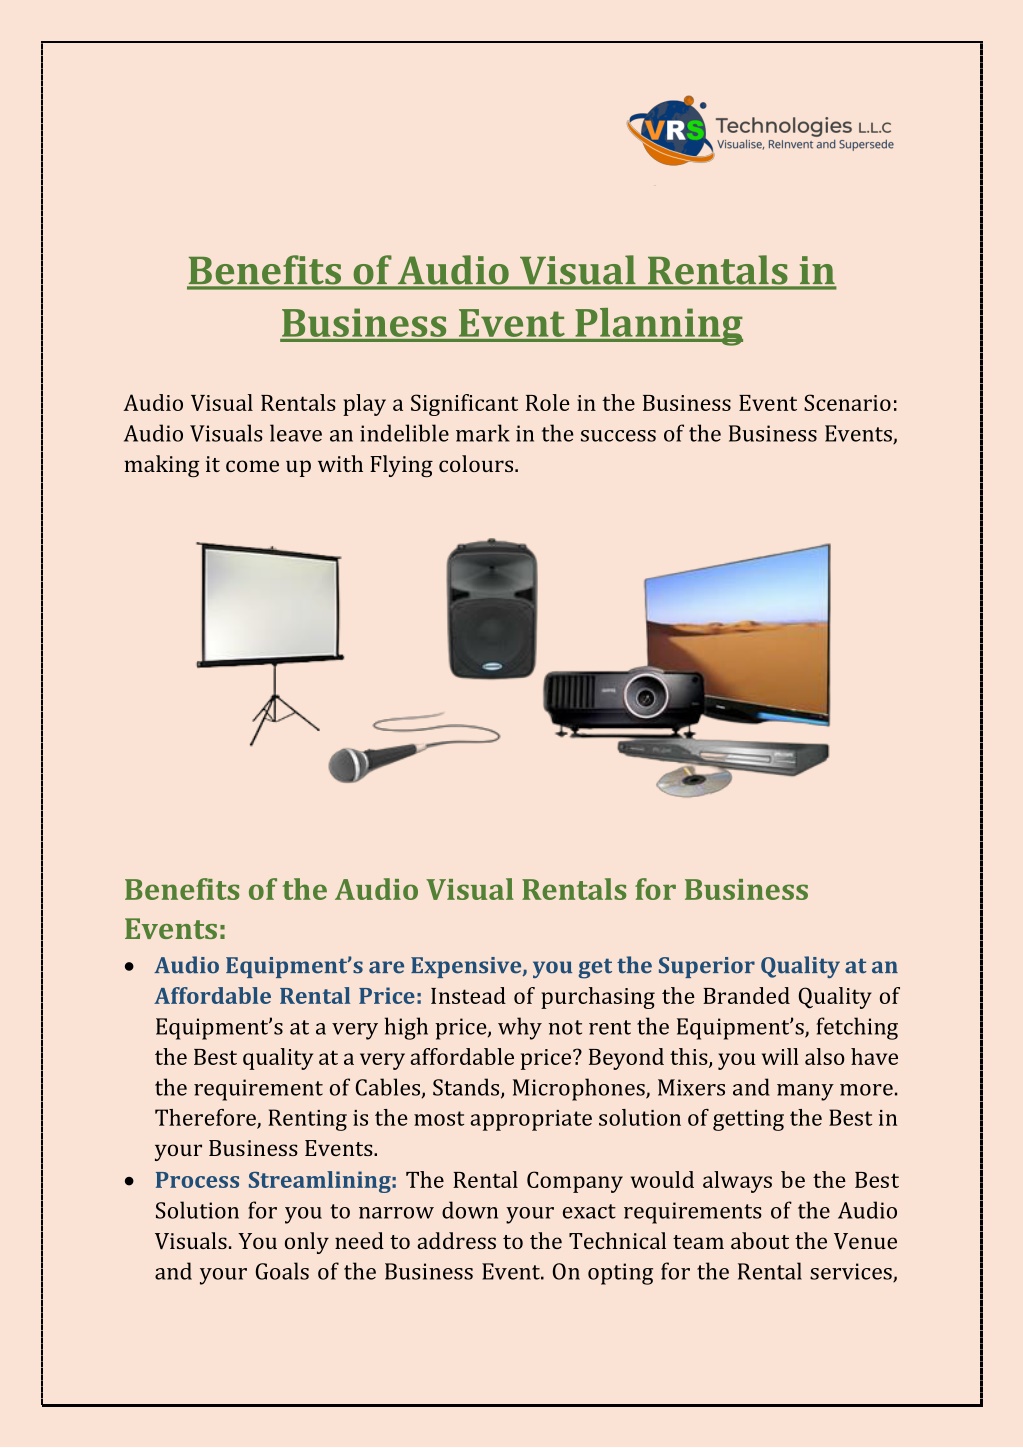 benefits of audio visual rentals in business l.w